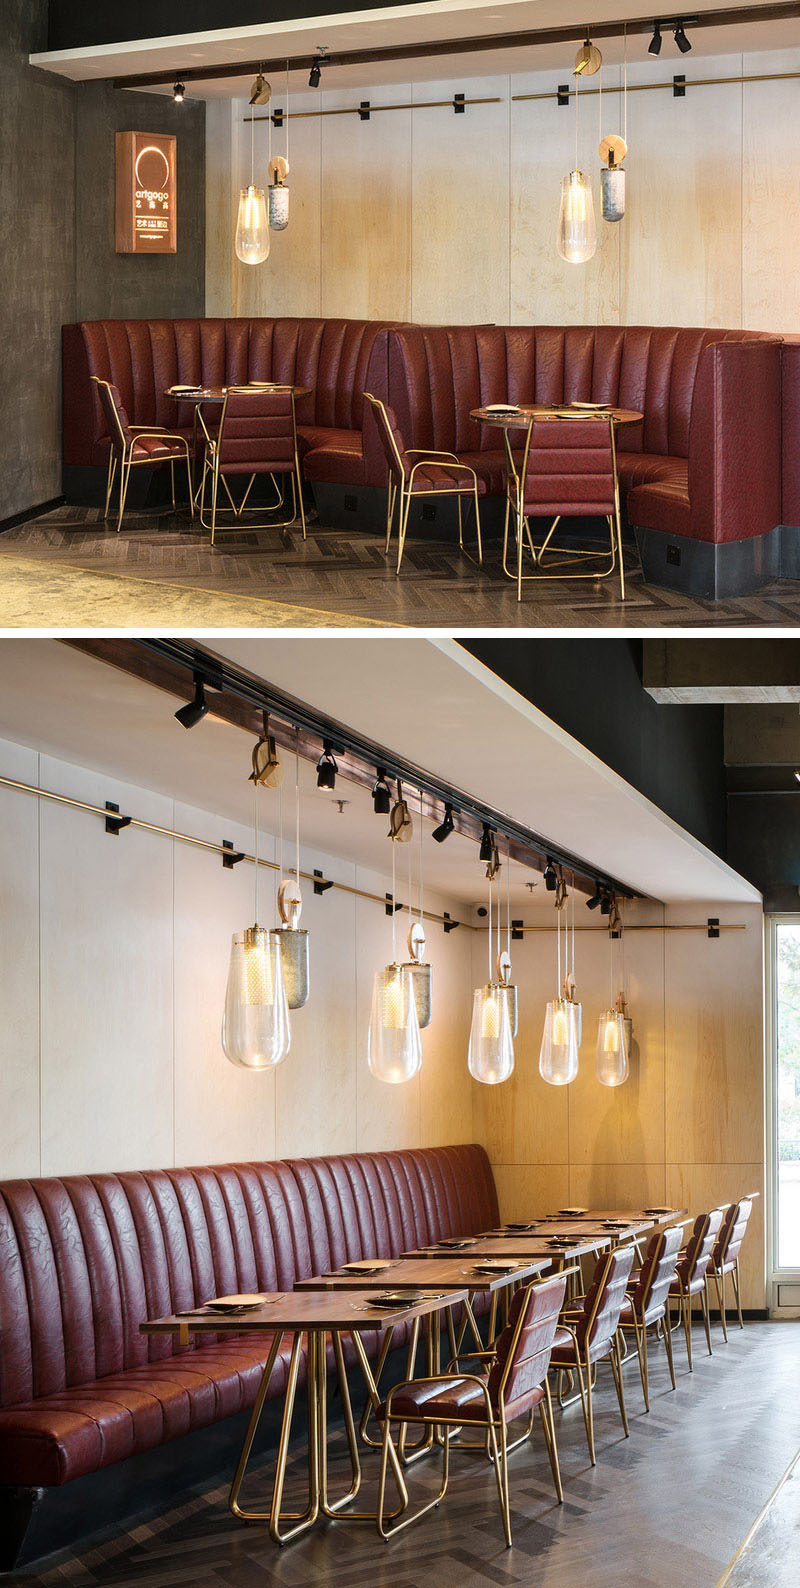 This Restaurant Is Filled With Pendant Lighting On A Pulley System